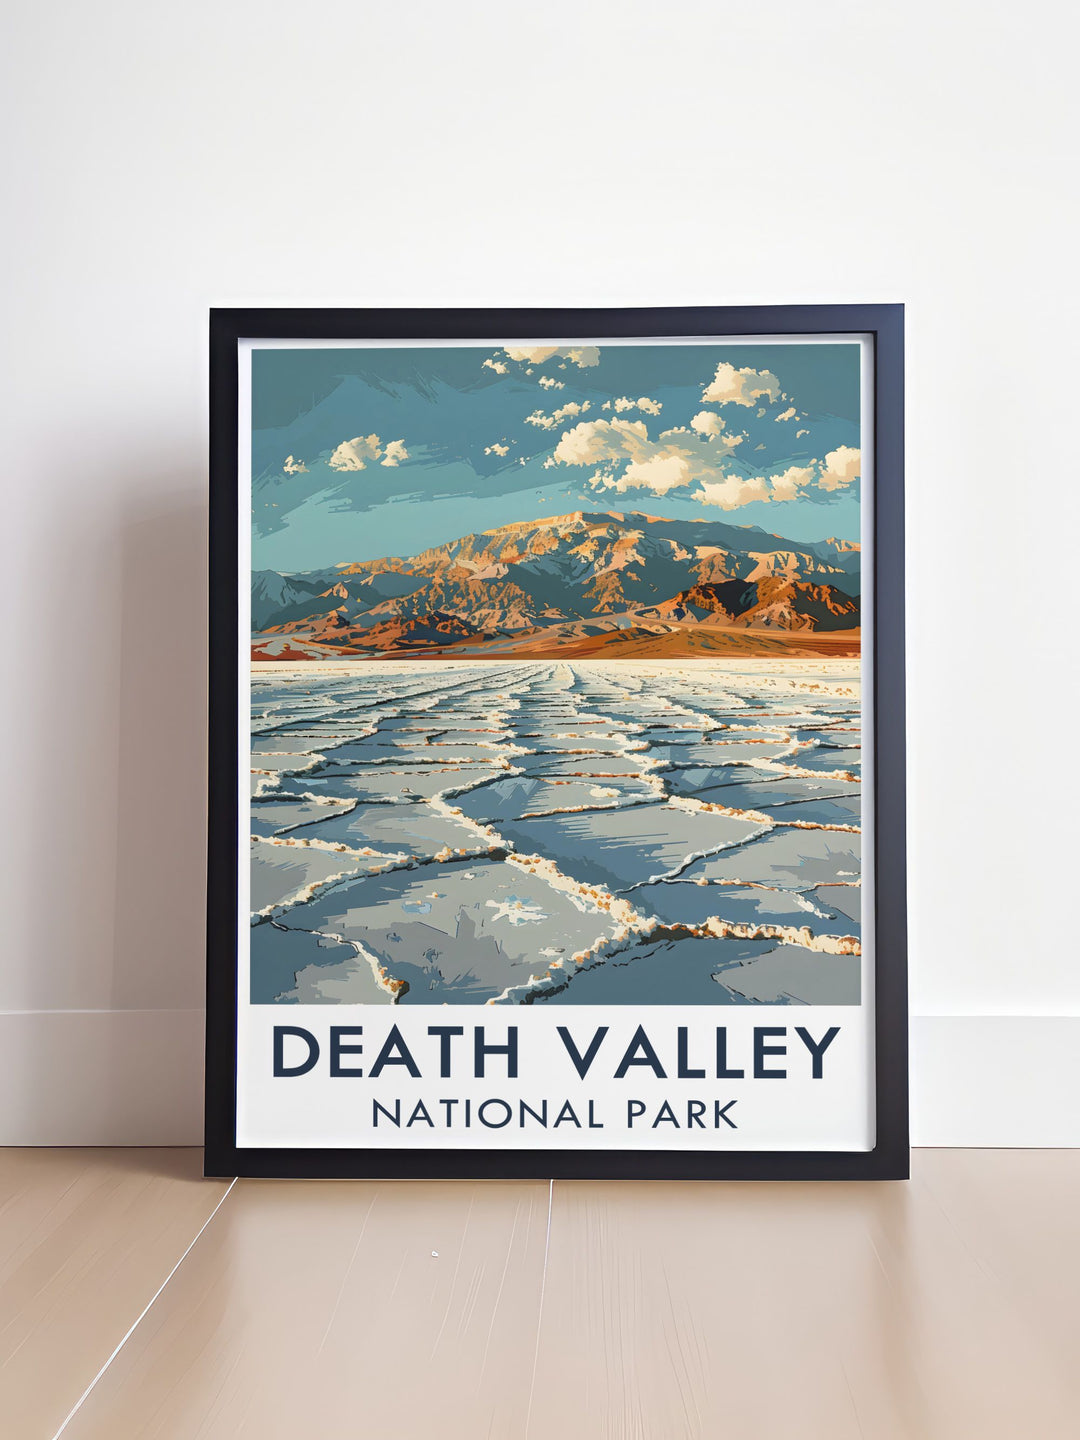 Modern wall decor showcasing the majestic beauty of Badwater Basin in Death Valley, perfect for bringing a sense of adventure and nature into your home.